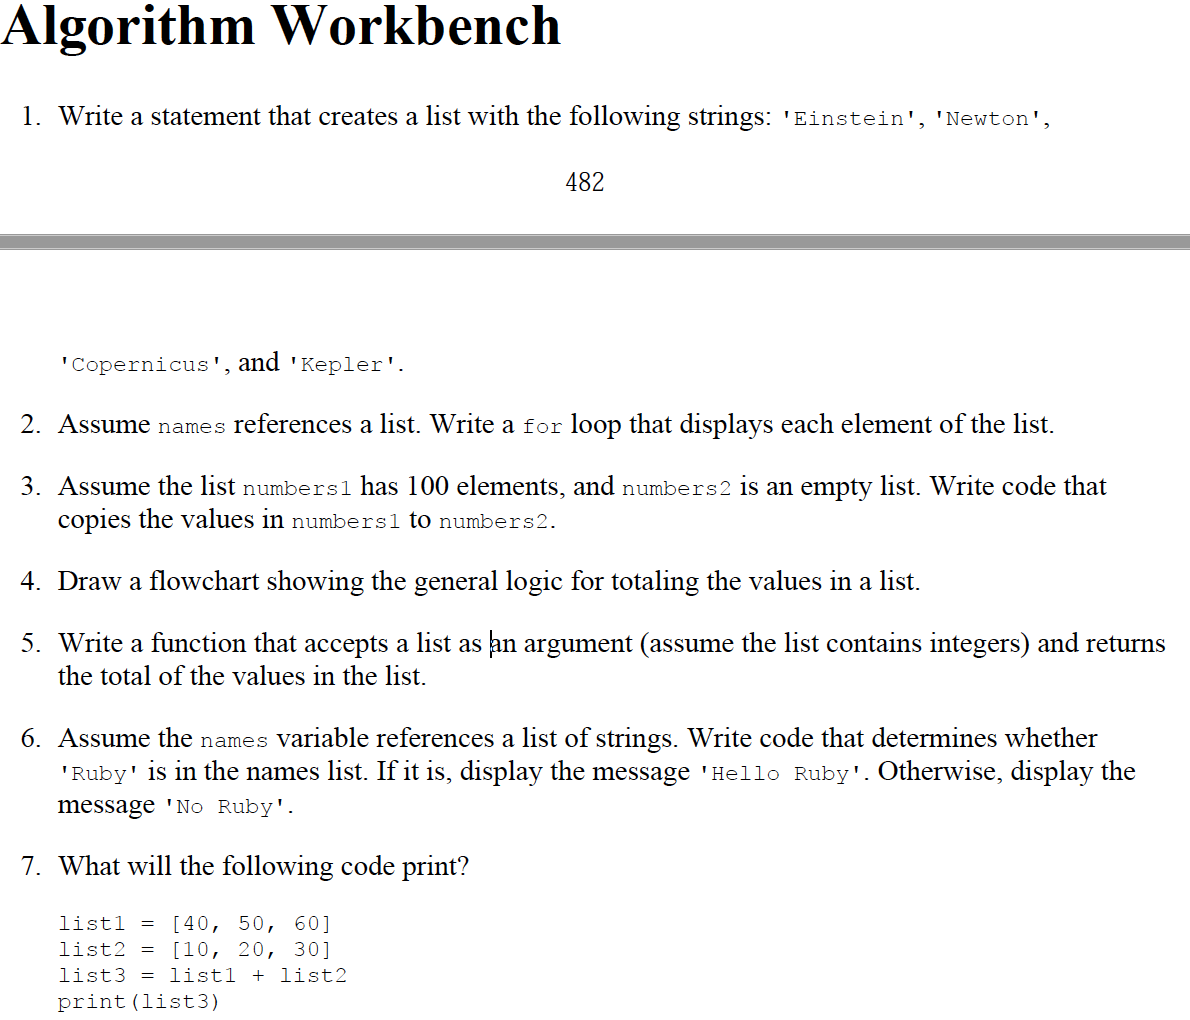 Algorithm Workbench
1. Write a statement that creates a list with the following strings: 'Einstein', 'Newton',
482
"Copernicus', and 'Kepler'.
2. Assume names references a list. Write a for loop that displays each element of the list.
3. Assume the list numbers1 has 100 elements, and numbers2 is an empty list. Write code that
copies the values in numbersl to numbers2.
4. Draw a flowchart showing the general logic for totaling the values in a list.
5. Write a function that accepts a list as an argument (assume the list contains integers) and returns
the total of the values in the list.
6. Assume the names variable references a list of strings. Write code that determines whether
'Ruby' is in the names list. If it is, display the message 'Hello Ruby'. Otherwise, display the
message 'No Ruby'.
7. What will the following code print?
listl
= [40, 50, 60]
list2 = [10, 20, 30]
list3 = list1 + list2
print(list3)
